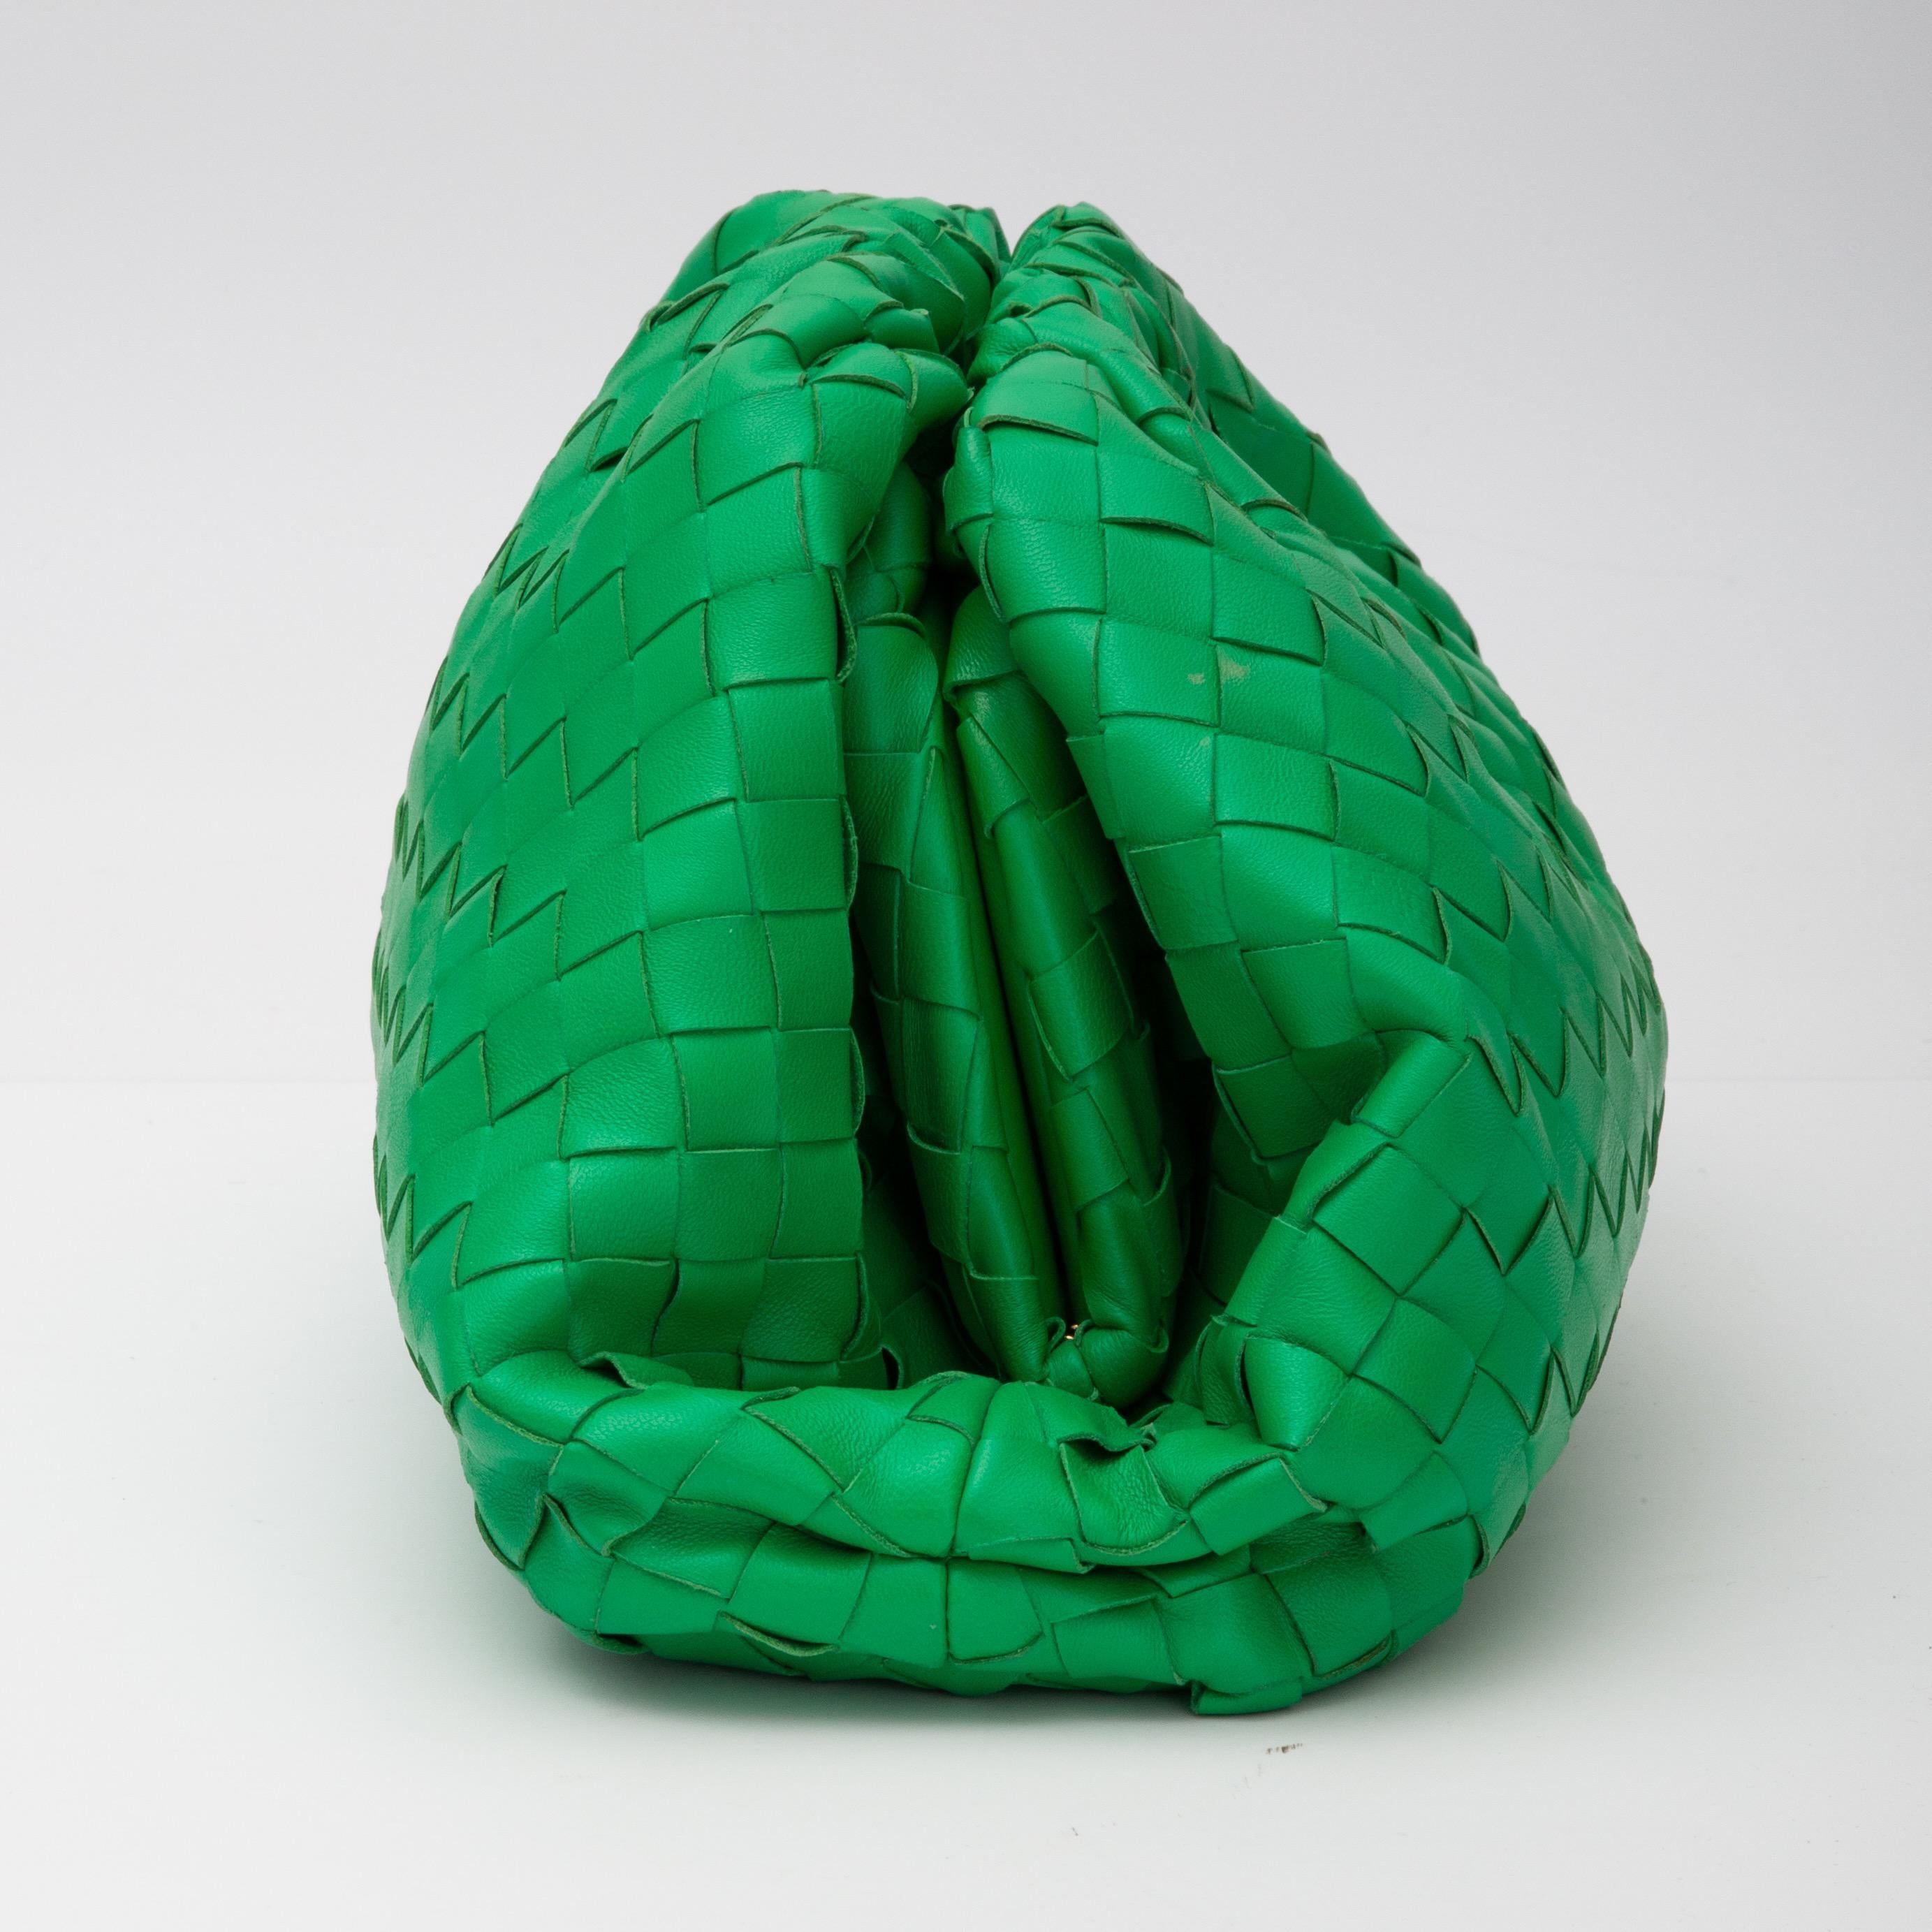 This mini Bottega Veneta bag is made of intrecciato leather in green.

COLOR: Parakeet (green)
MATERIAL: Calfskin
MEASURES: H 7” x L 15” x D 6.5”
COMES WITH: No name dust bag
CONDITION: Excellent - like new. Pristine.

Made in Italy